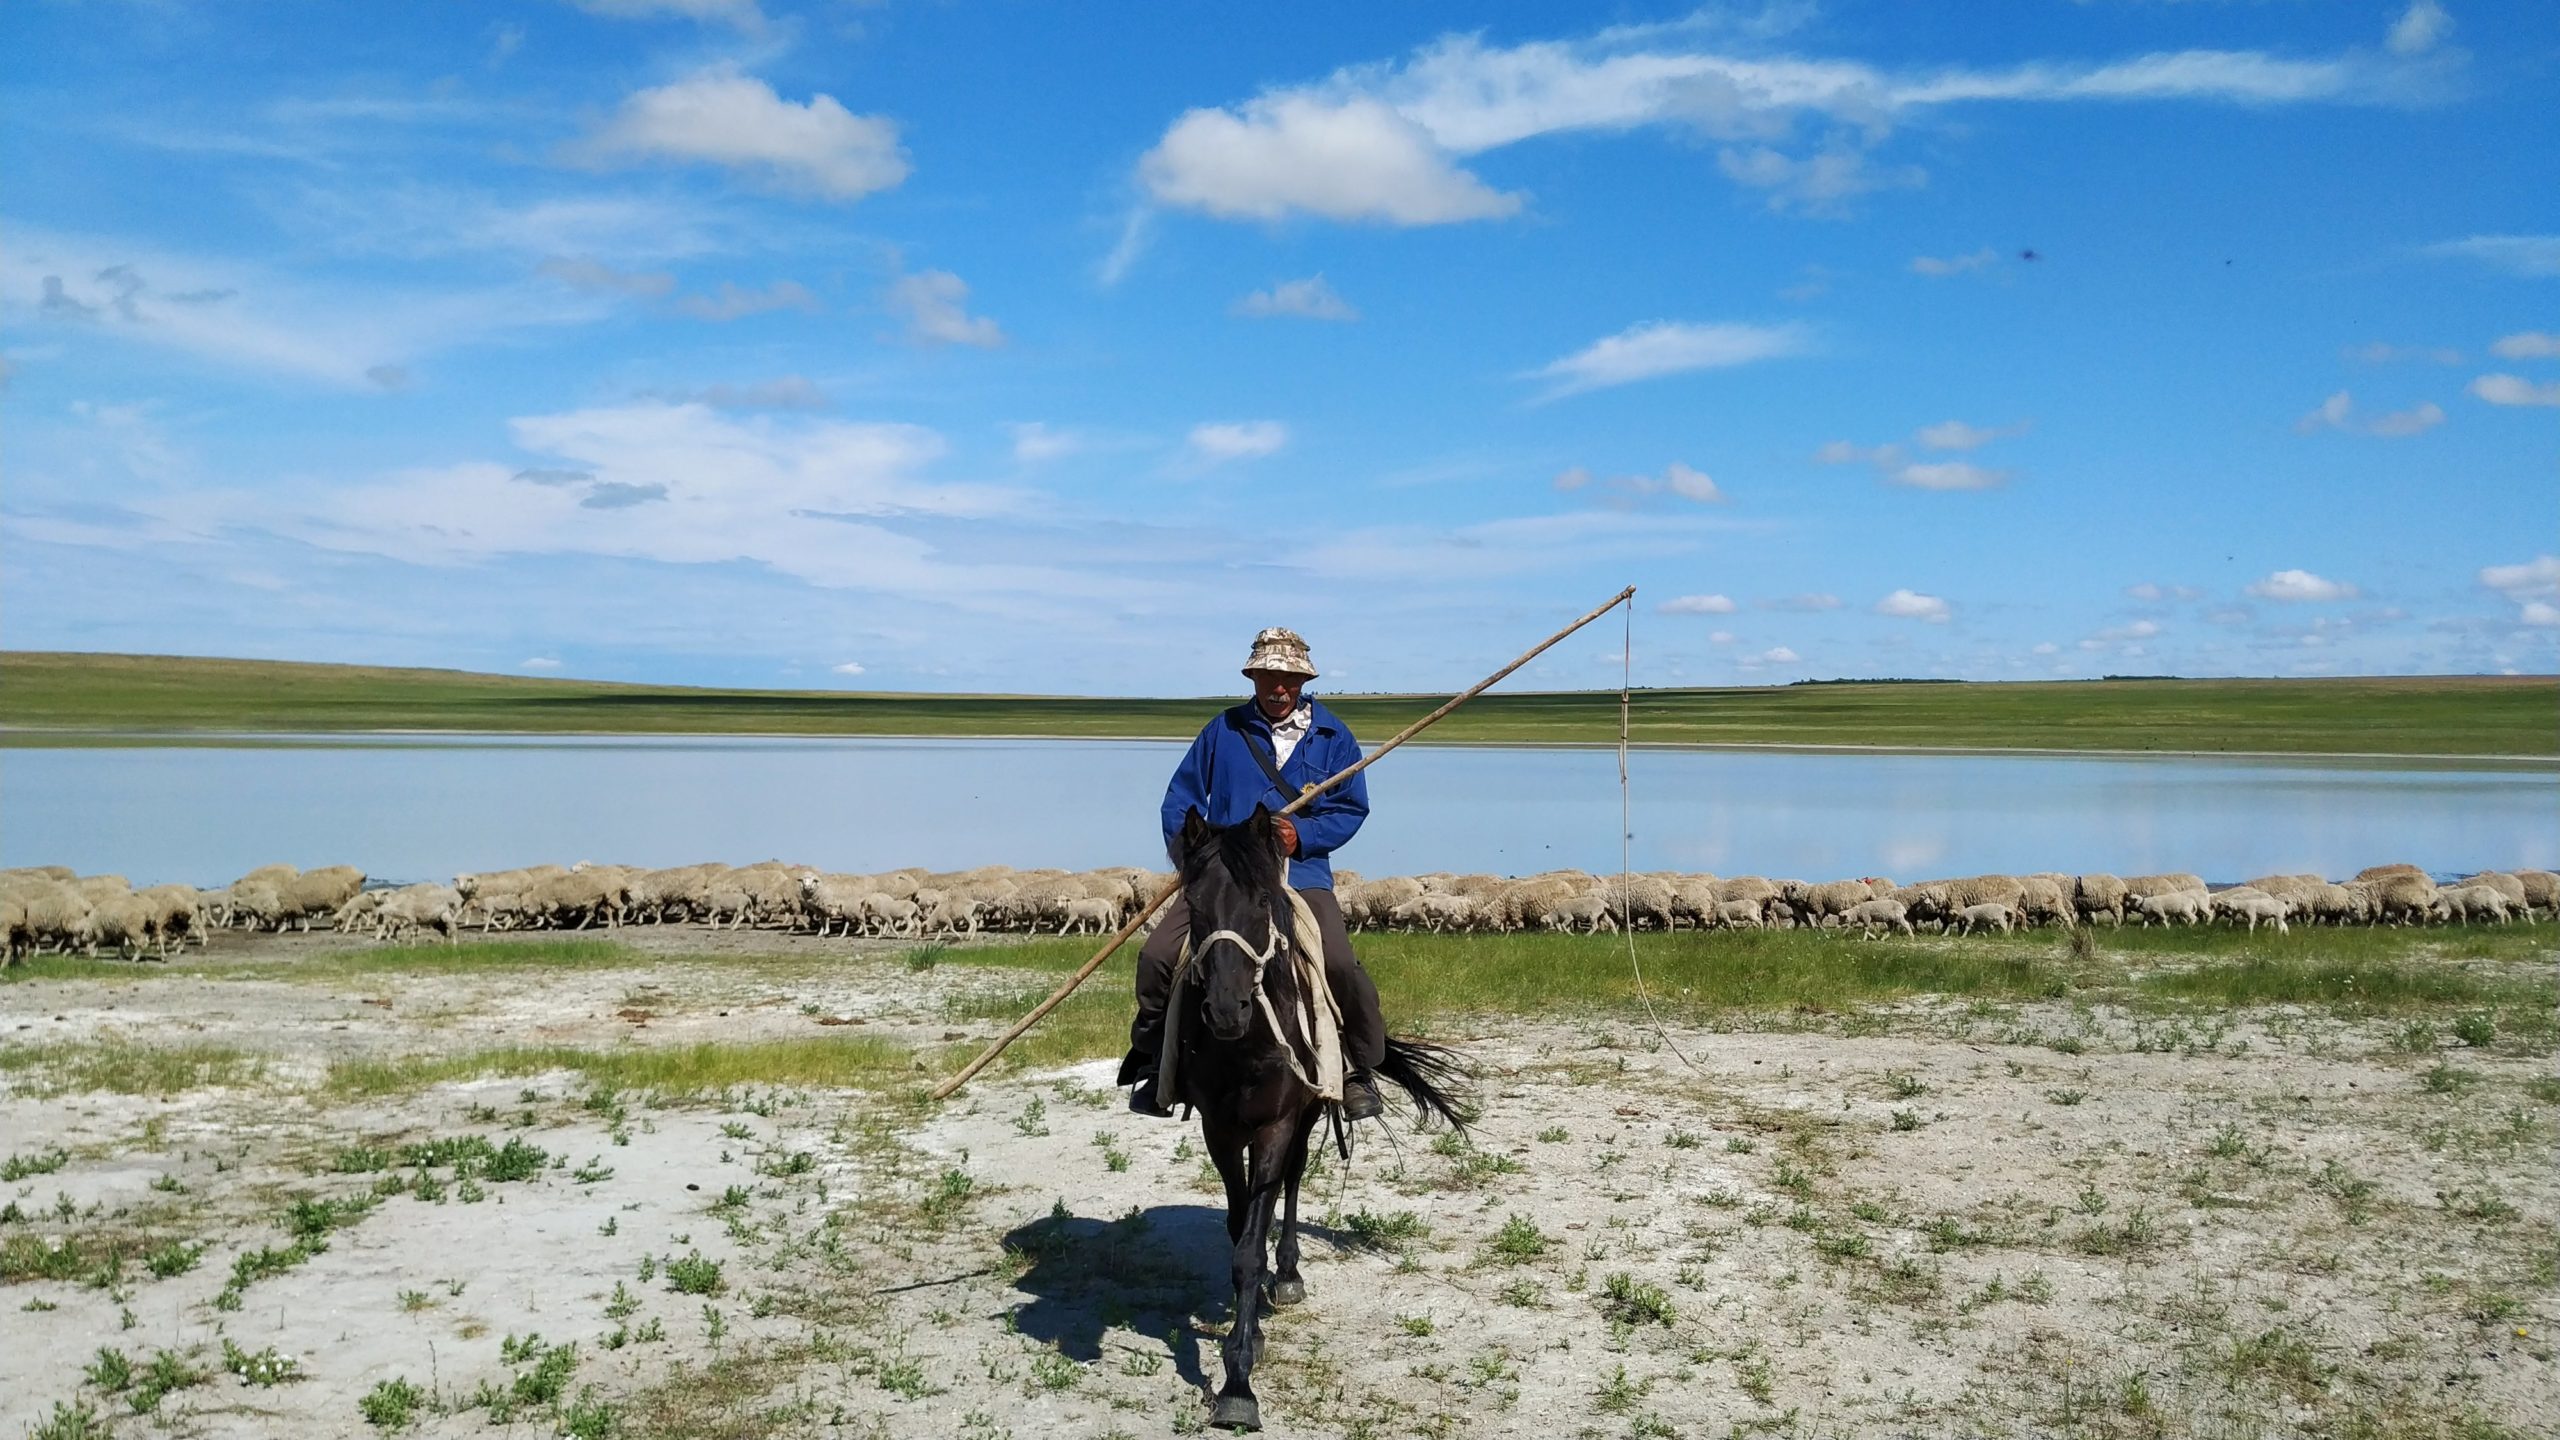 A shepherd in the Russian steppe in the Landscapes of Dauria.